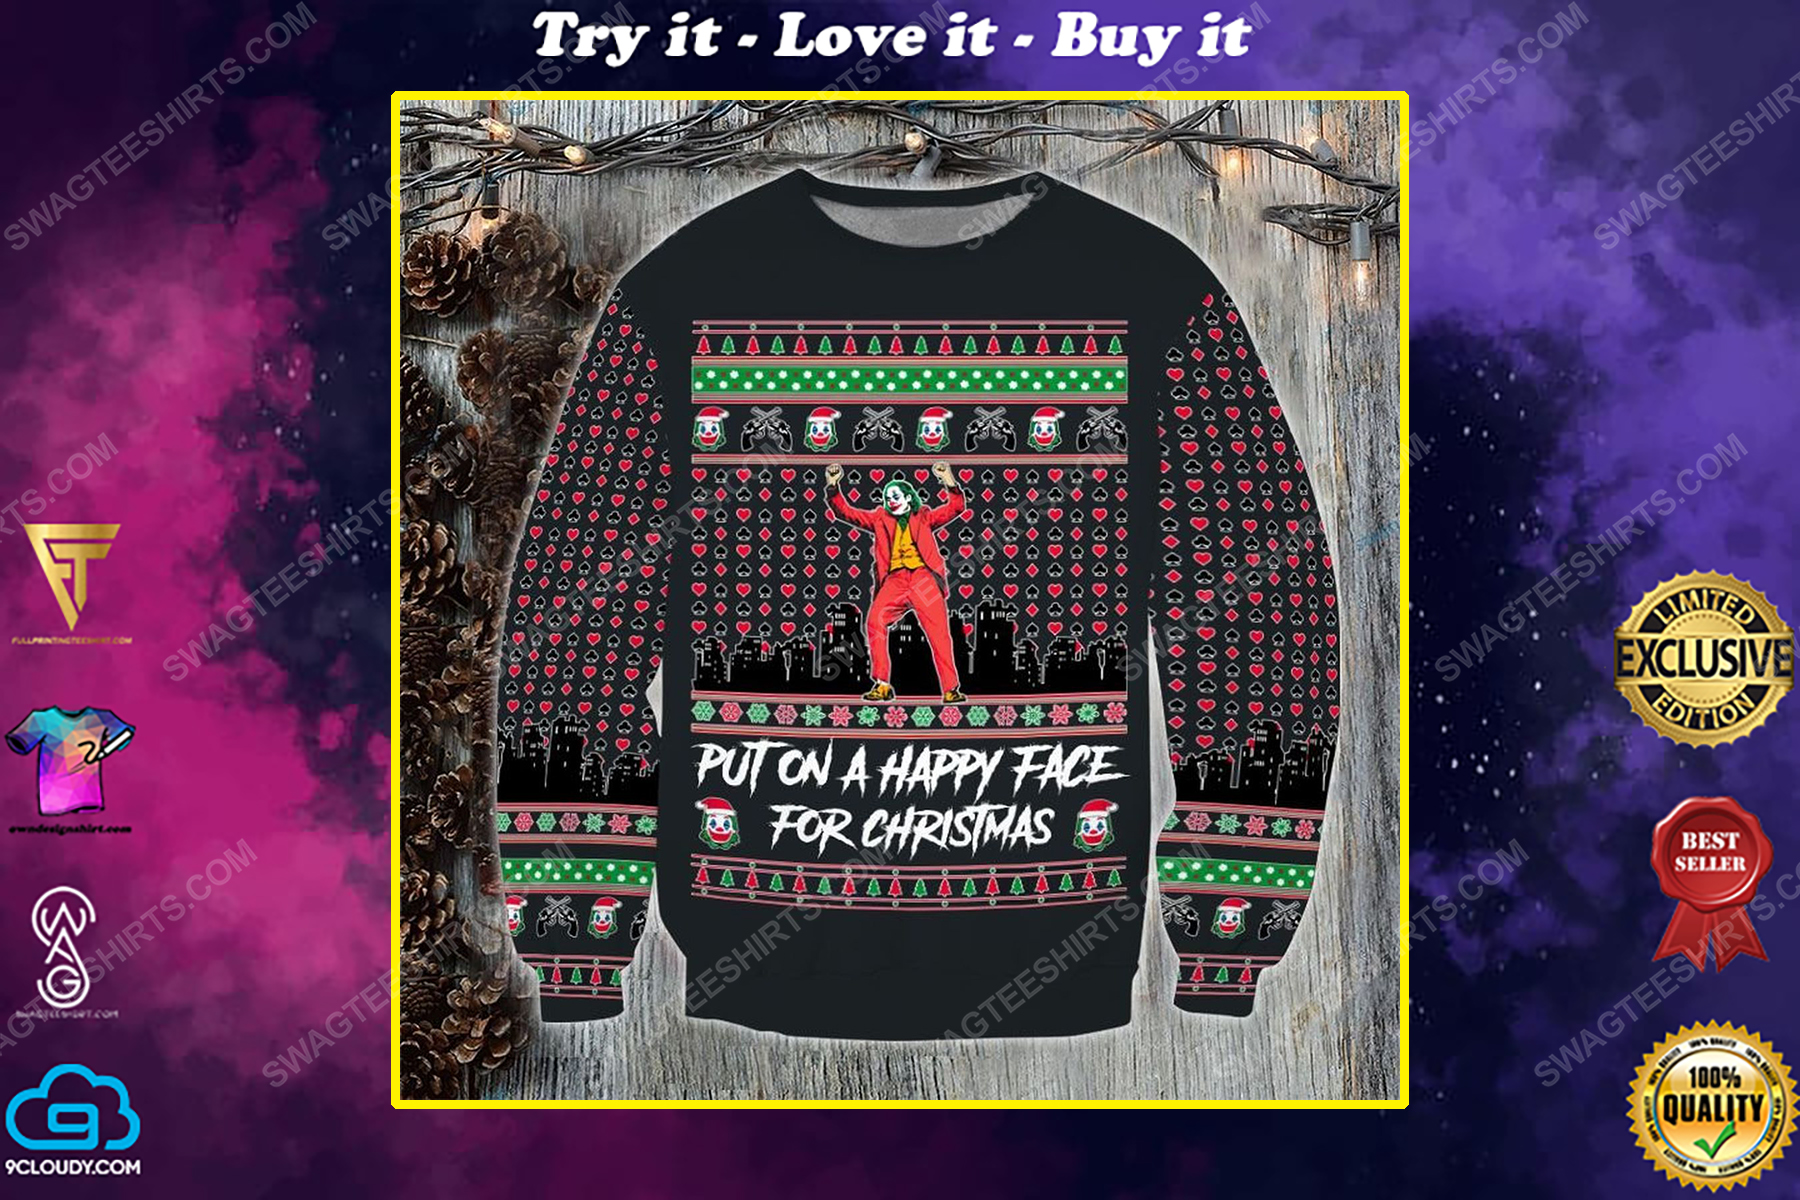 Joker put a happy face for christmas ​ugly christmas sweater 1